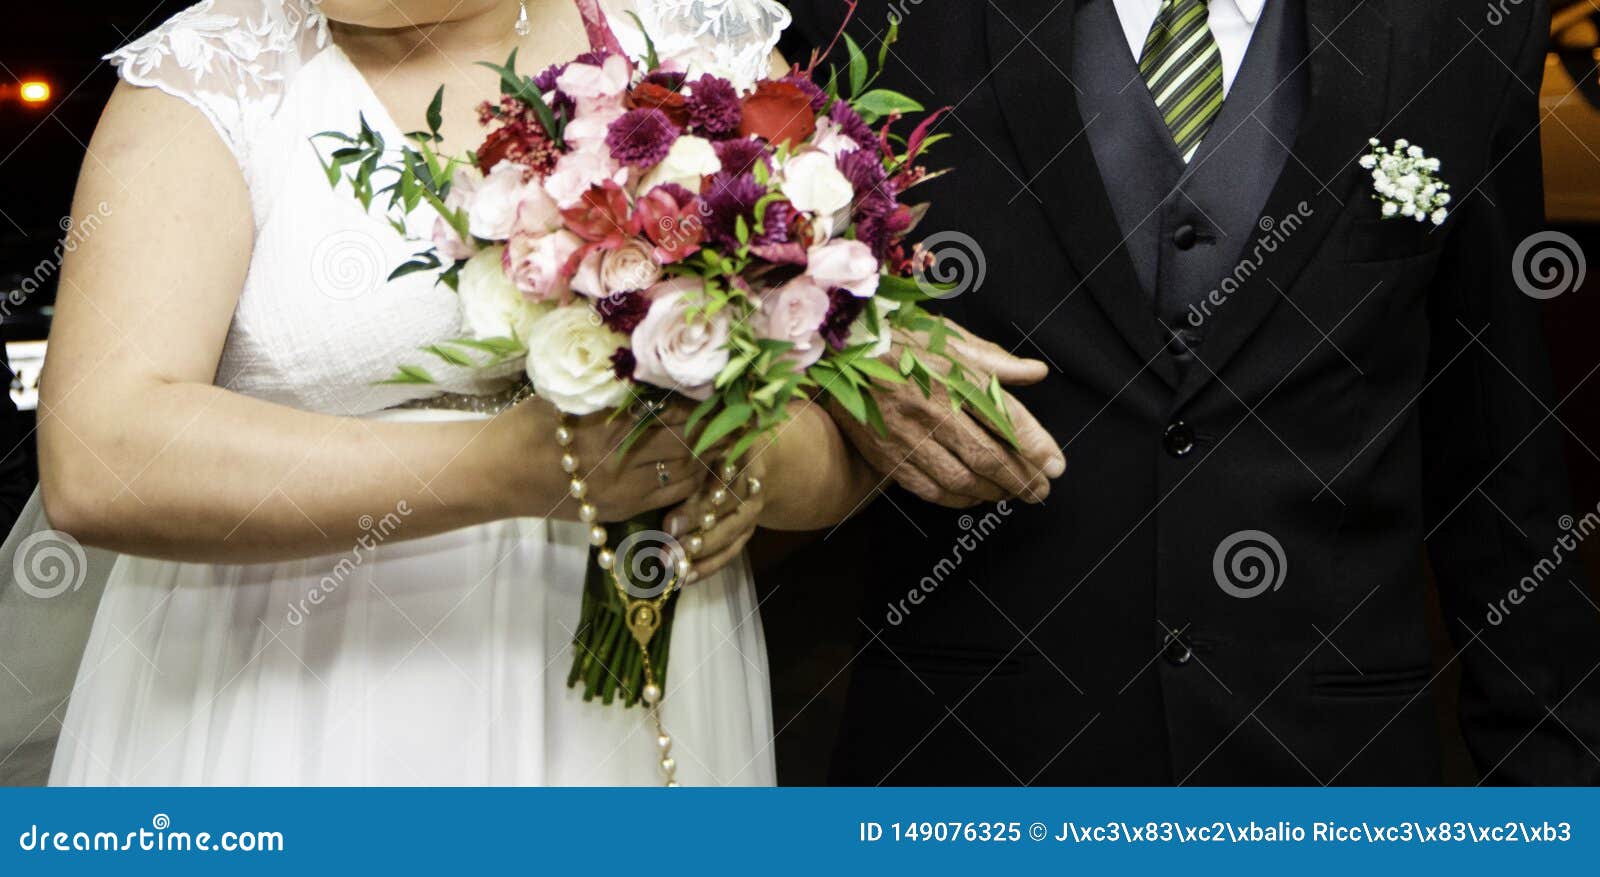 Bride Holding Bouquet of Flowers with Her Father at the Entrance of ...